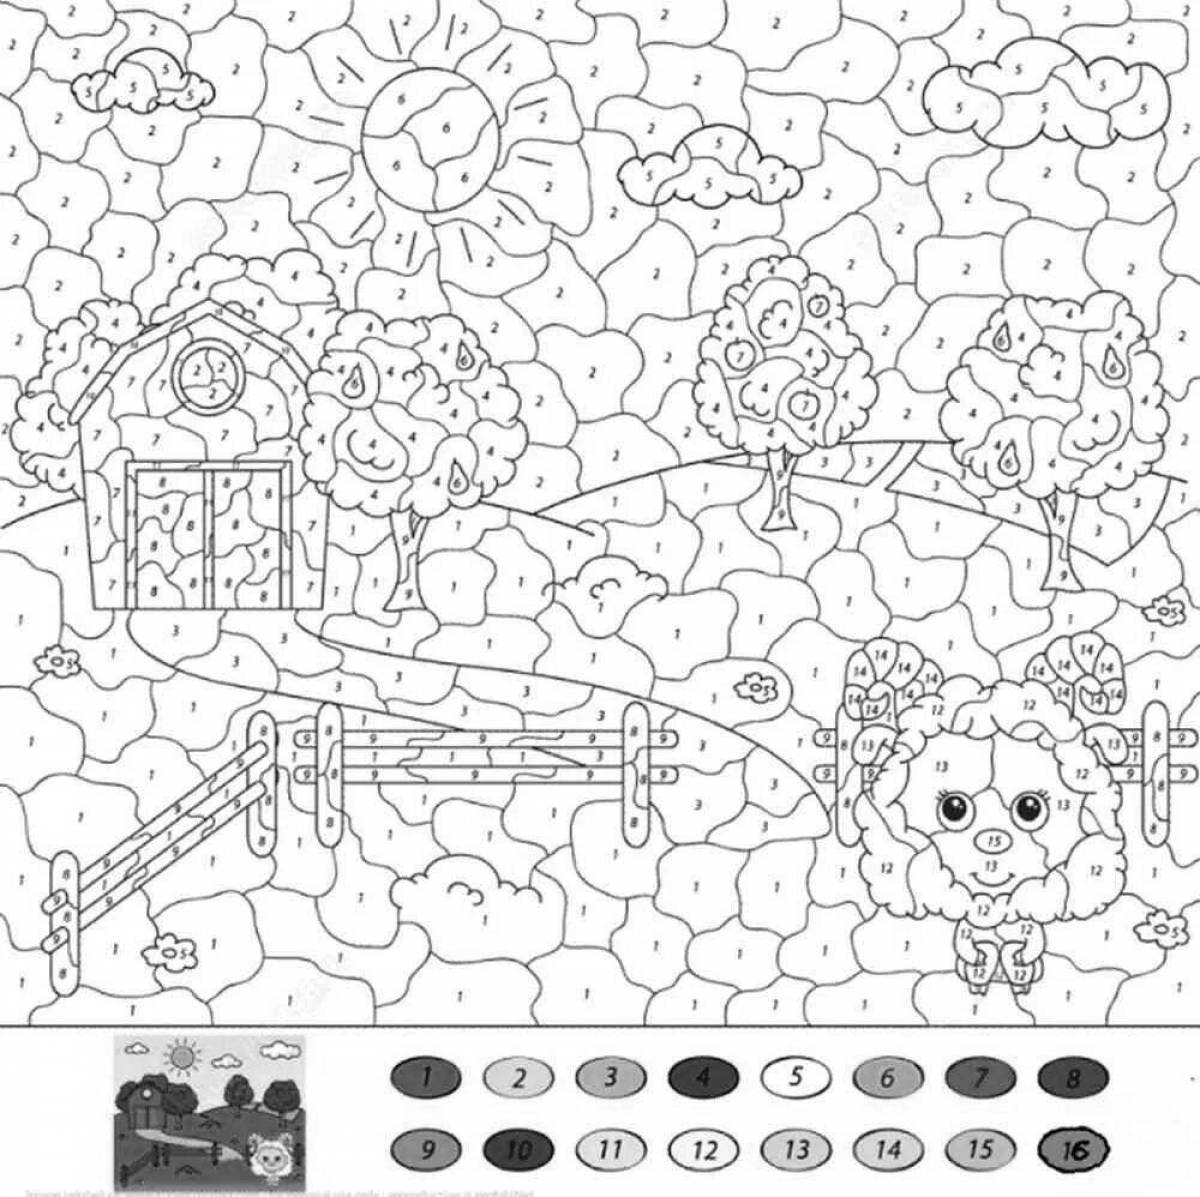 Mystical coloring by numbers without internet for android in Russian